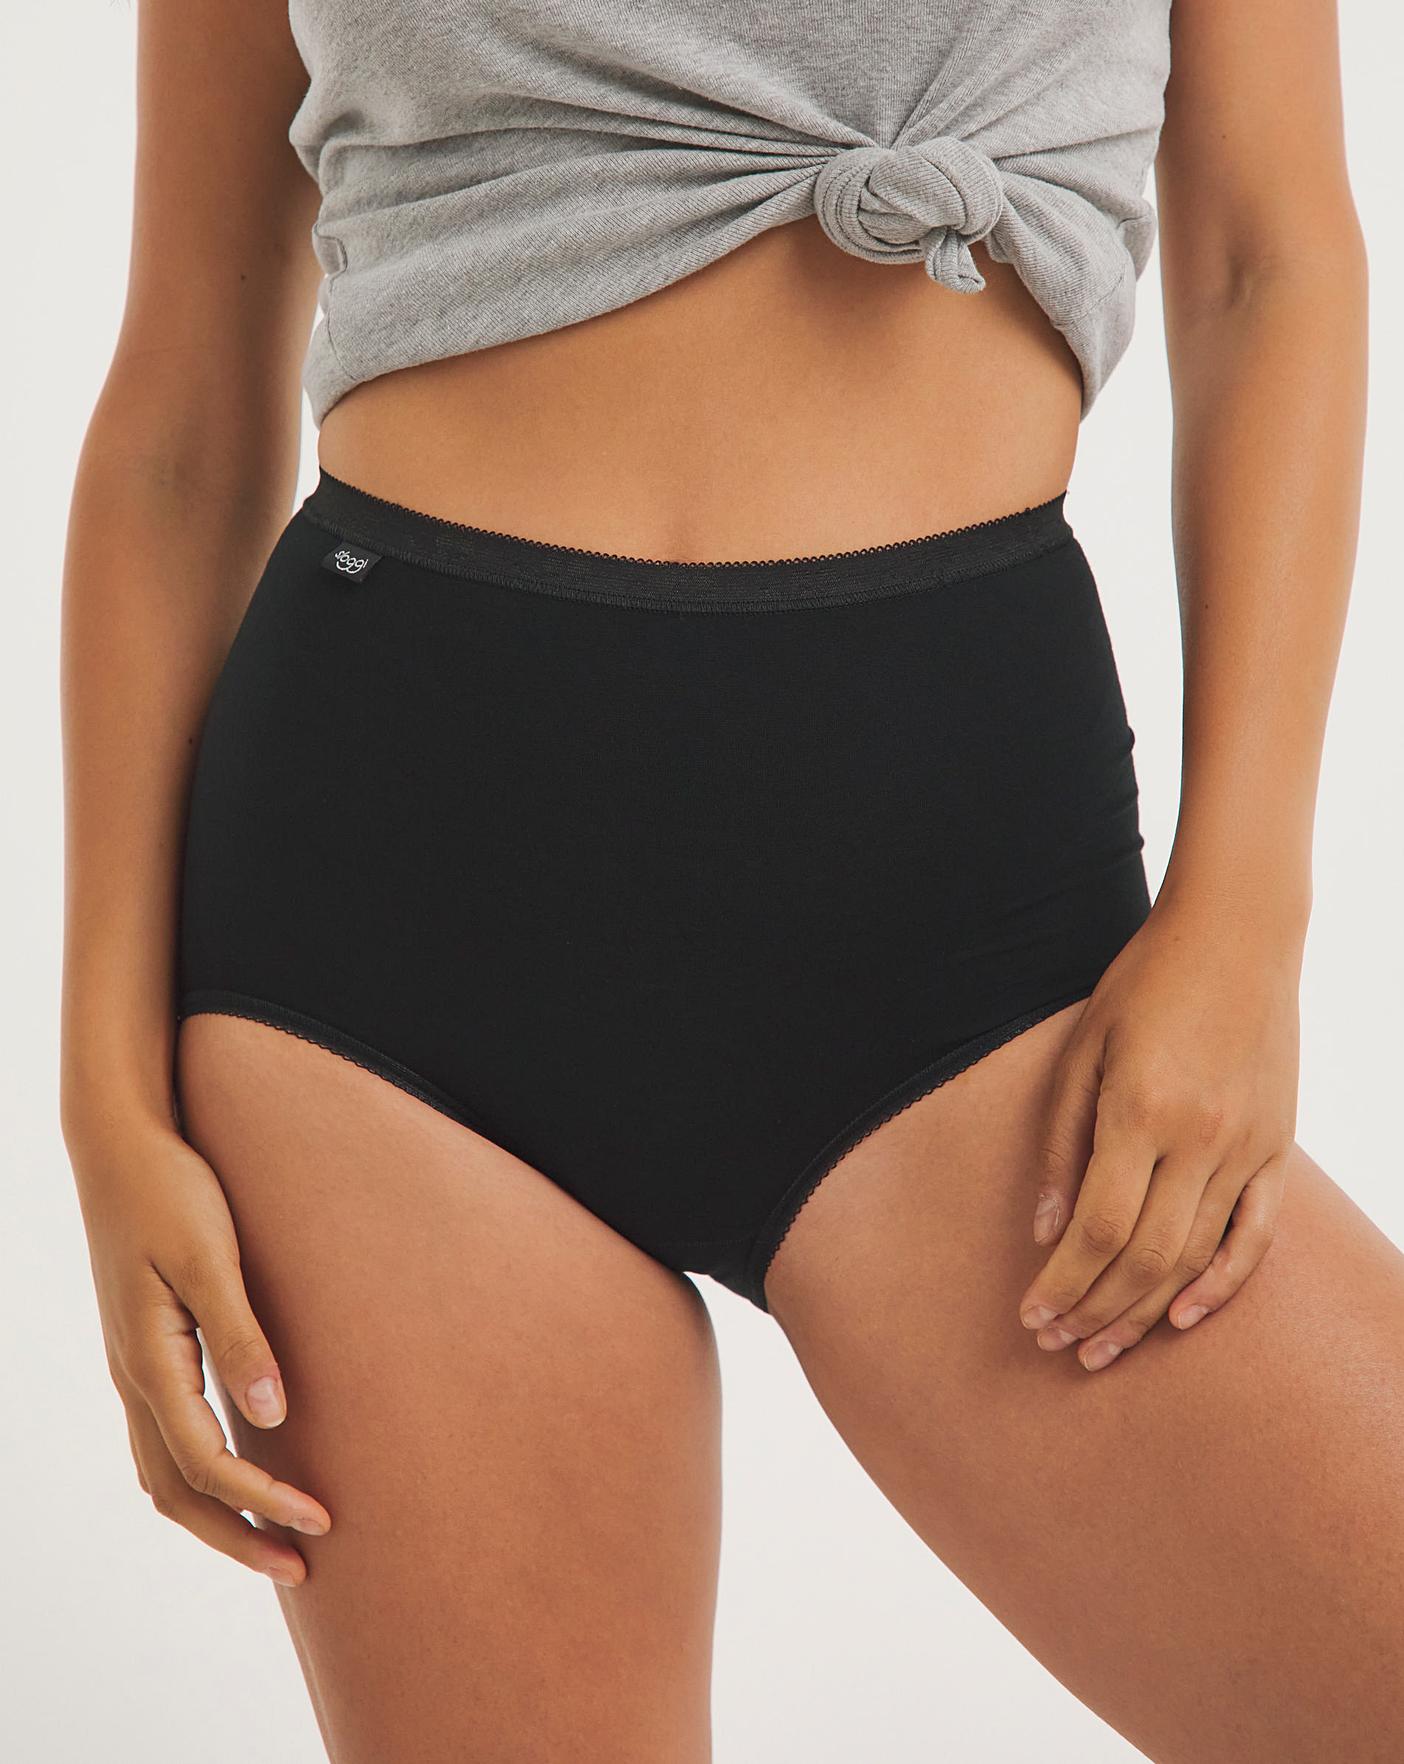 Buy Sloggi Basic Maxi Briefs 3 Pack from the Next UK online shop